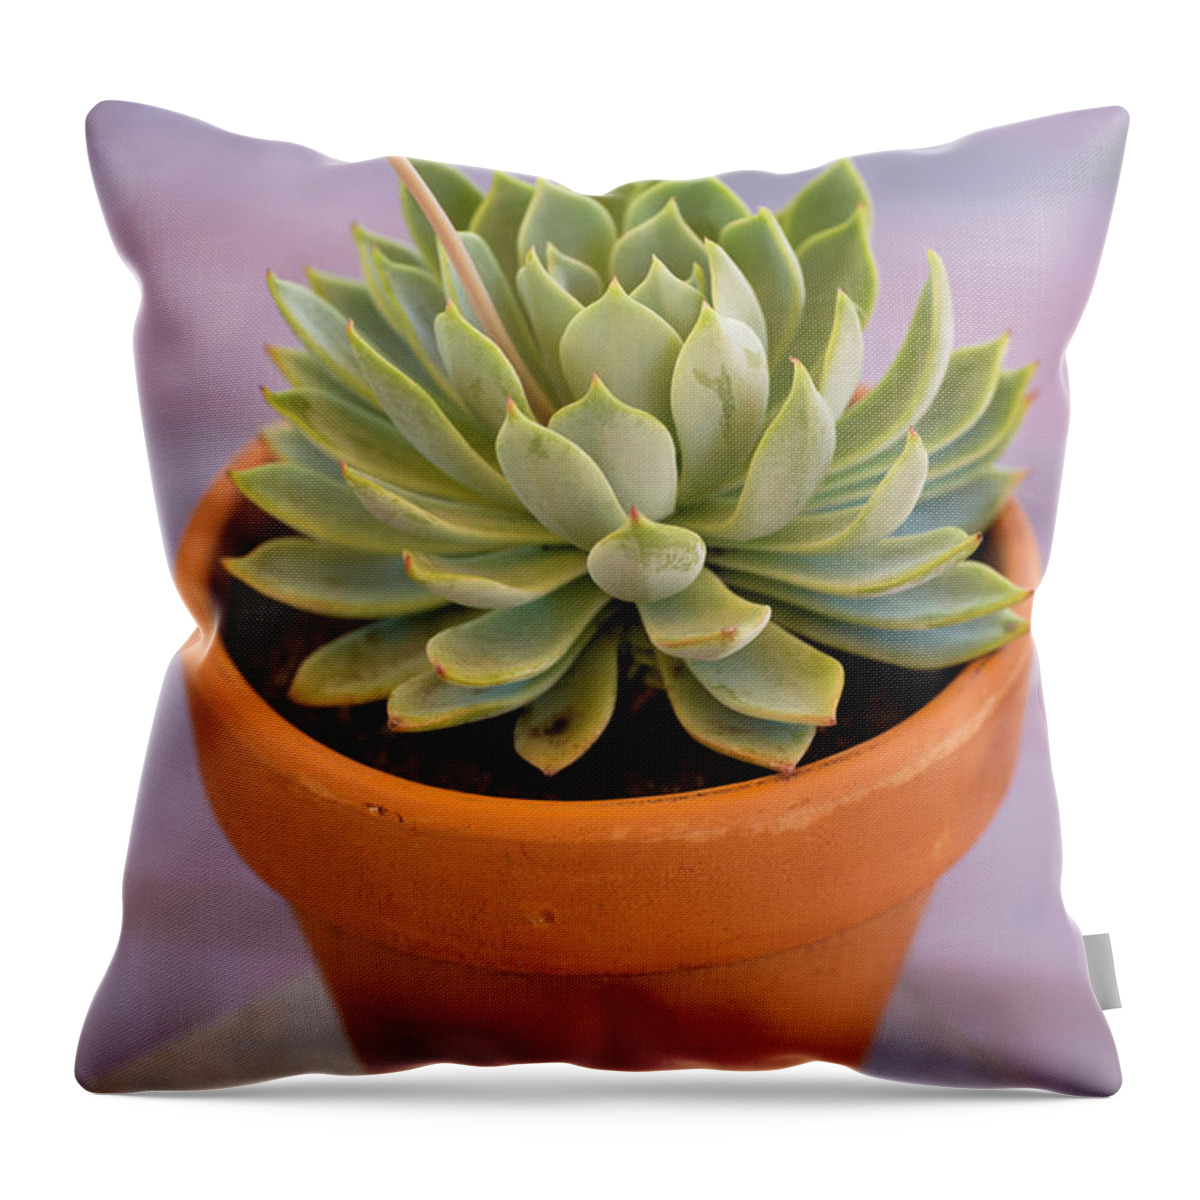 Cactus Throw Pillow featuring the photograph Succulent Plant In Clay Pot by Dlerick